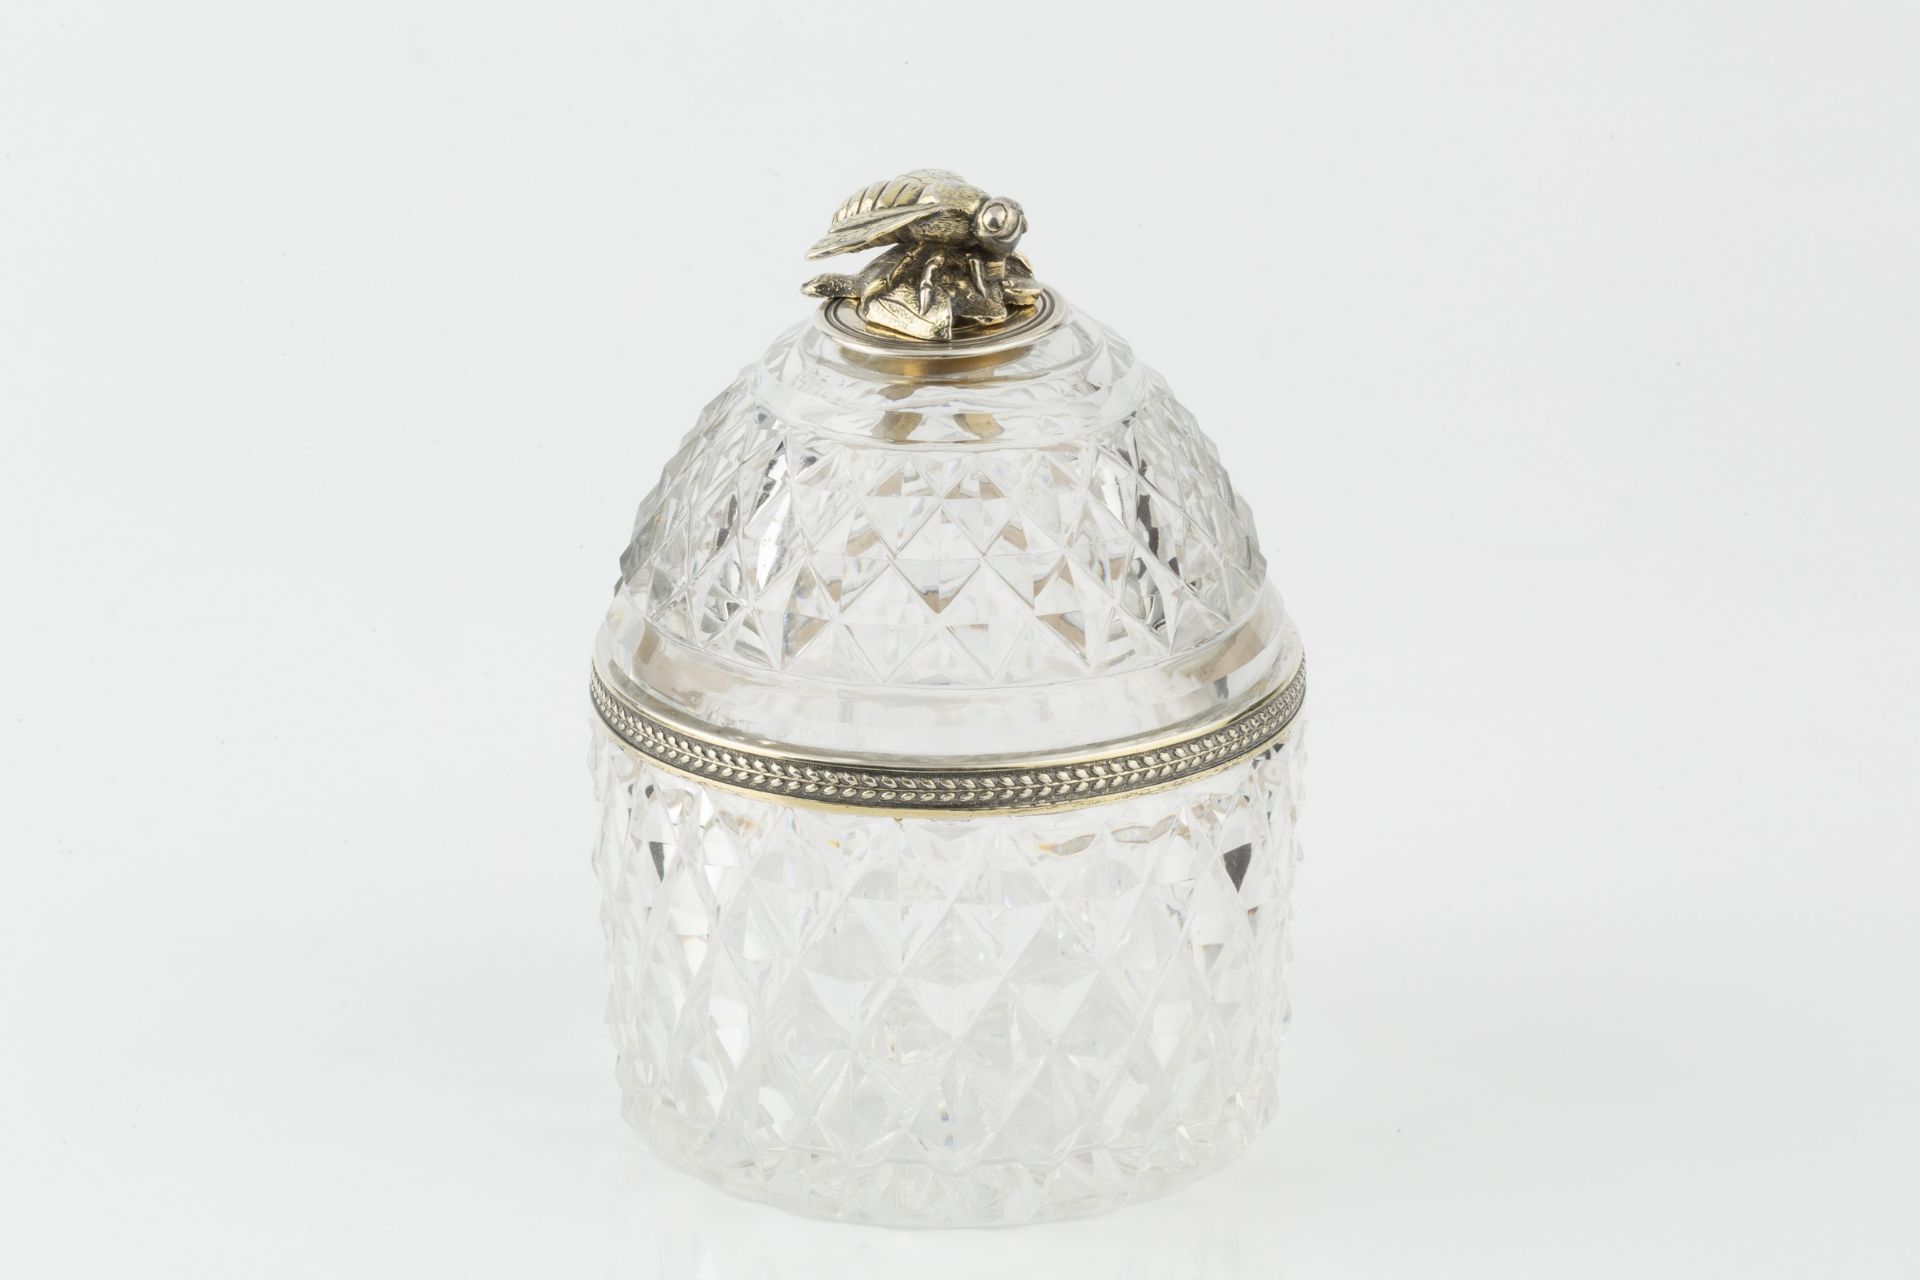 A George III silver-gilt mounted cut glass honey pot and cover, the hobnail cut cylindrical jar with - Image 4 of 5